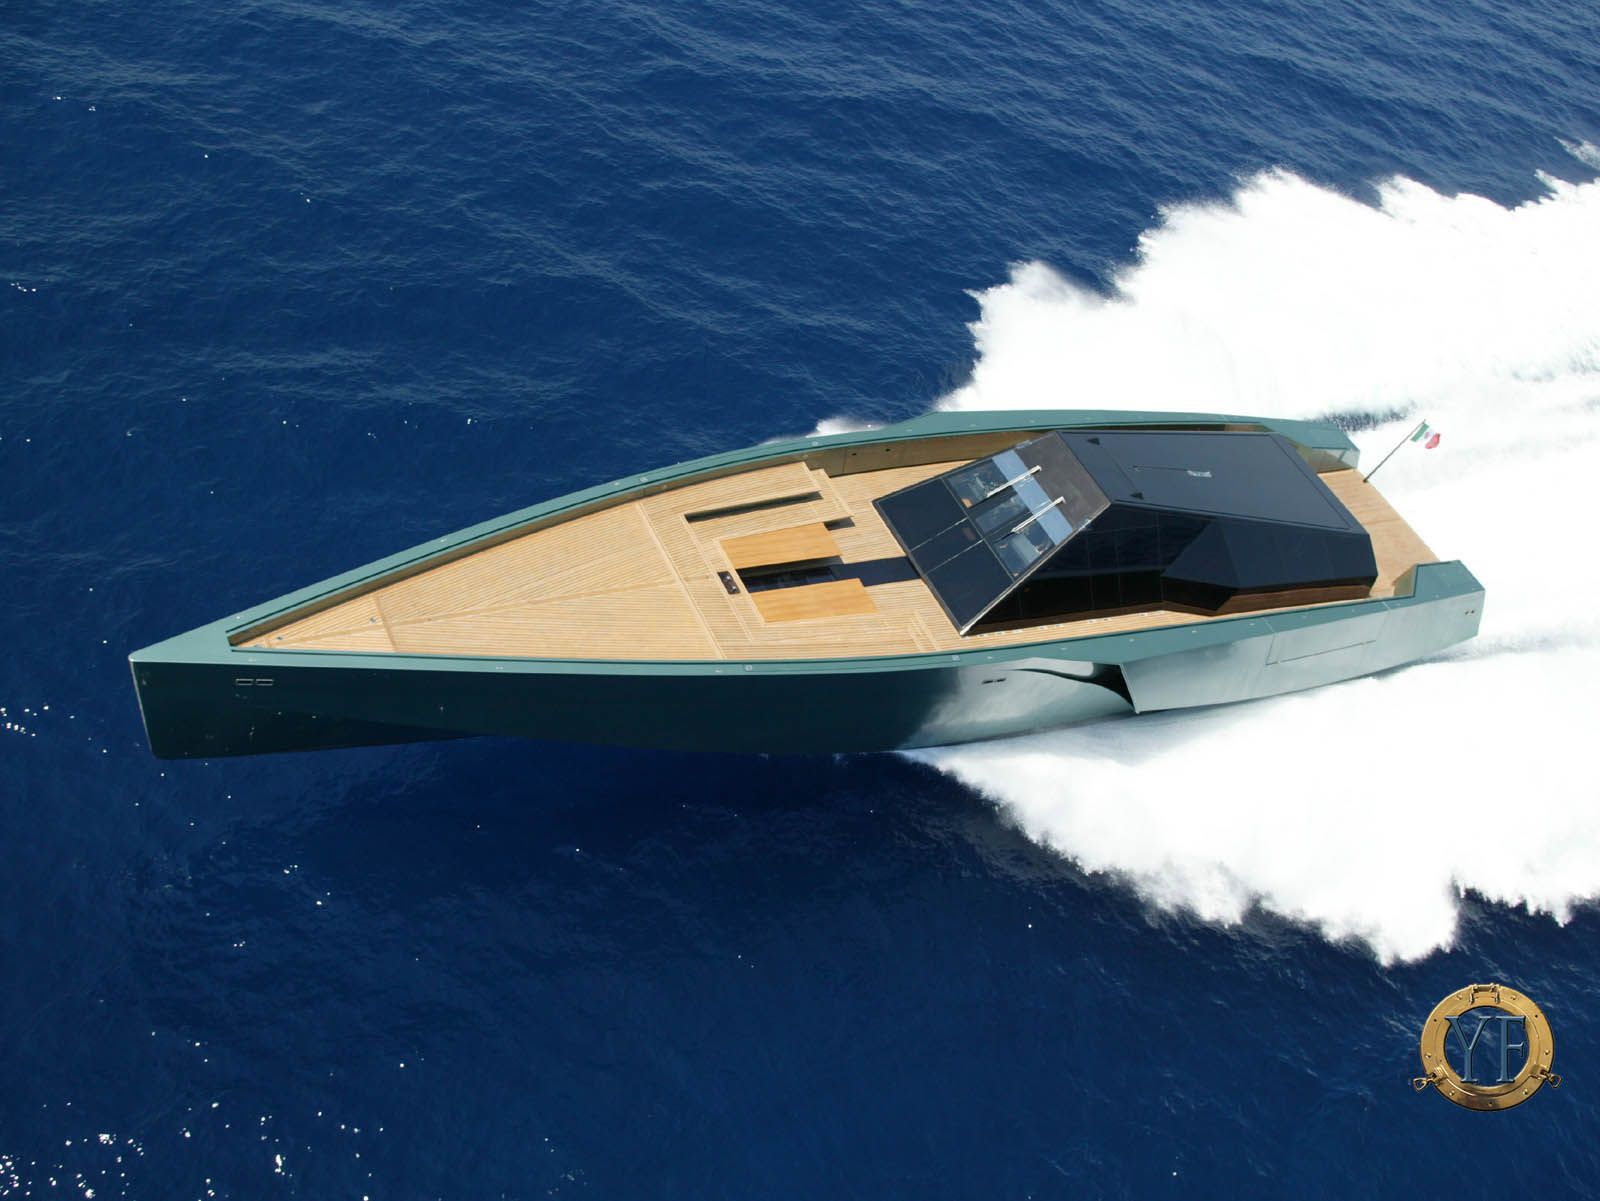 Wally Yacht Wallpapers - Wally Yacht | YachtForums: We Know Big Boats!